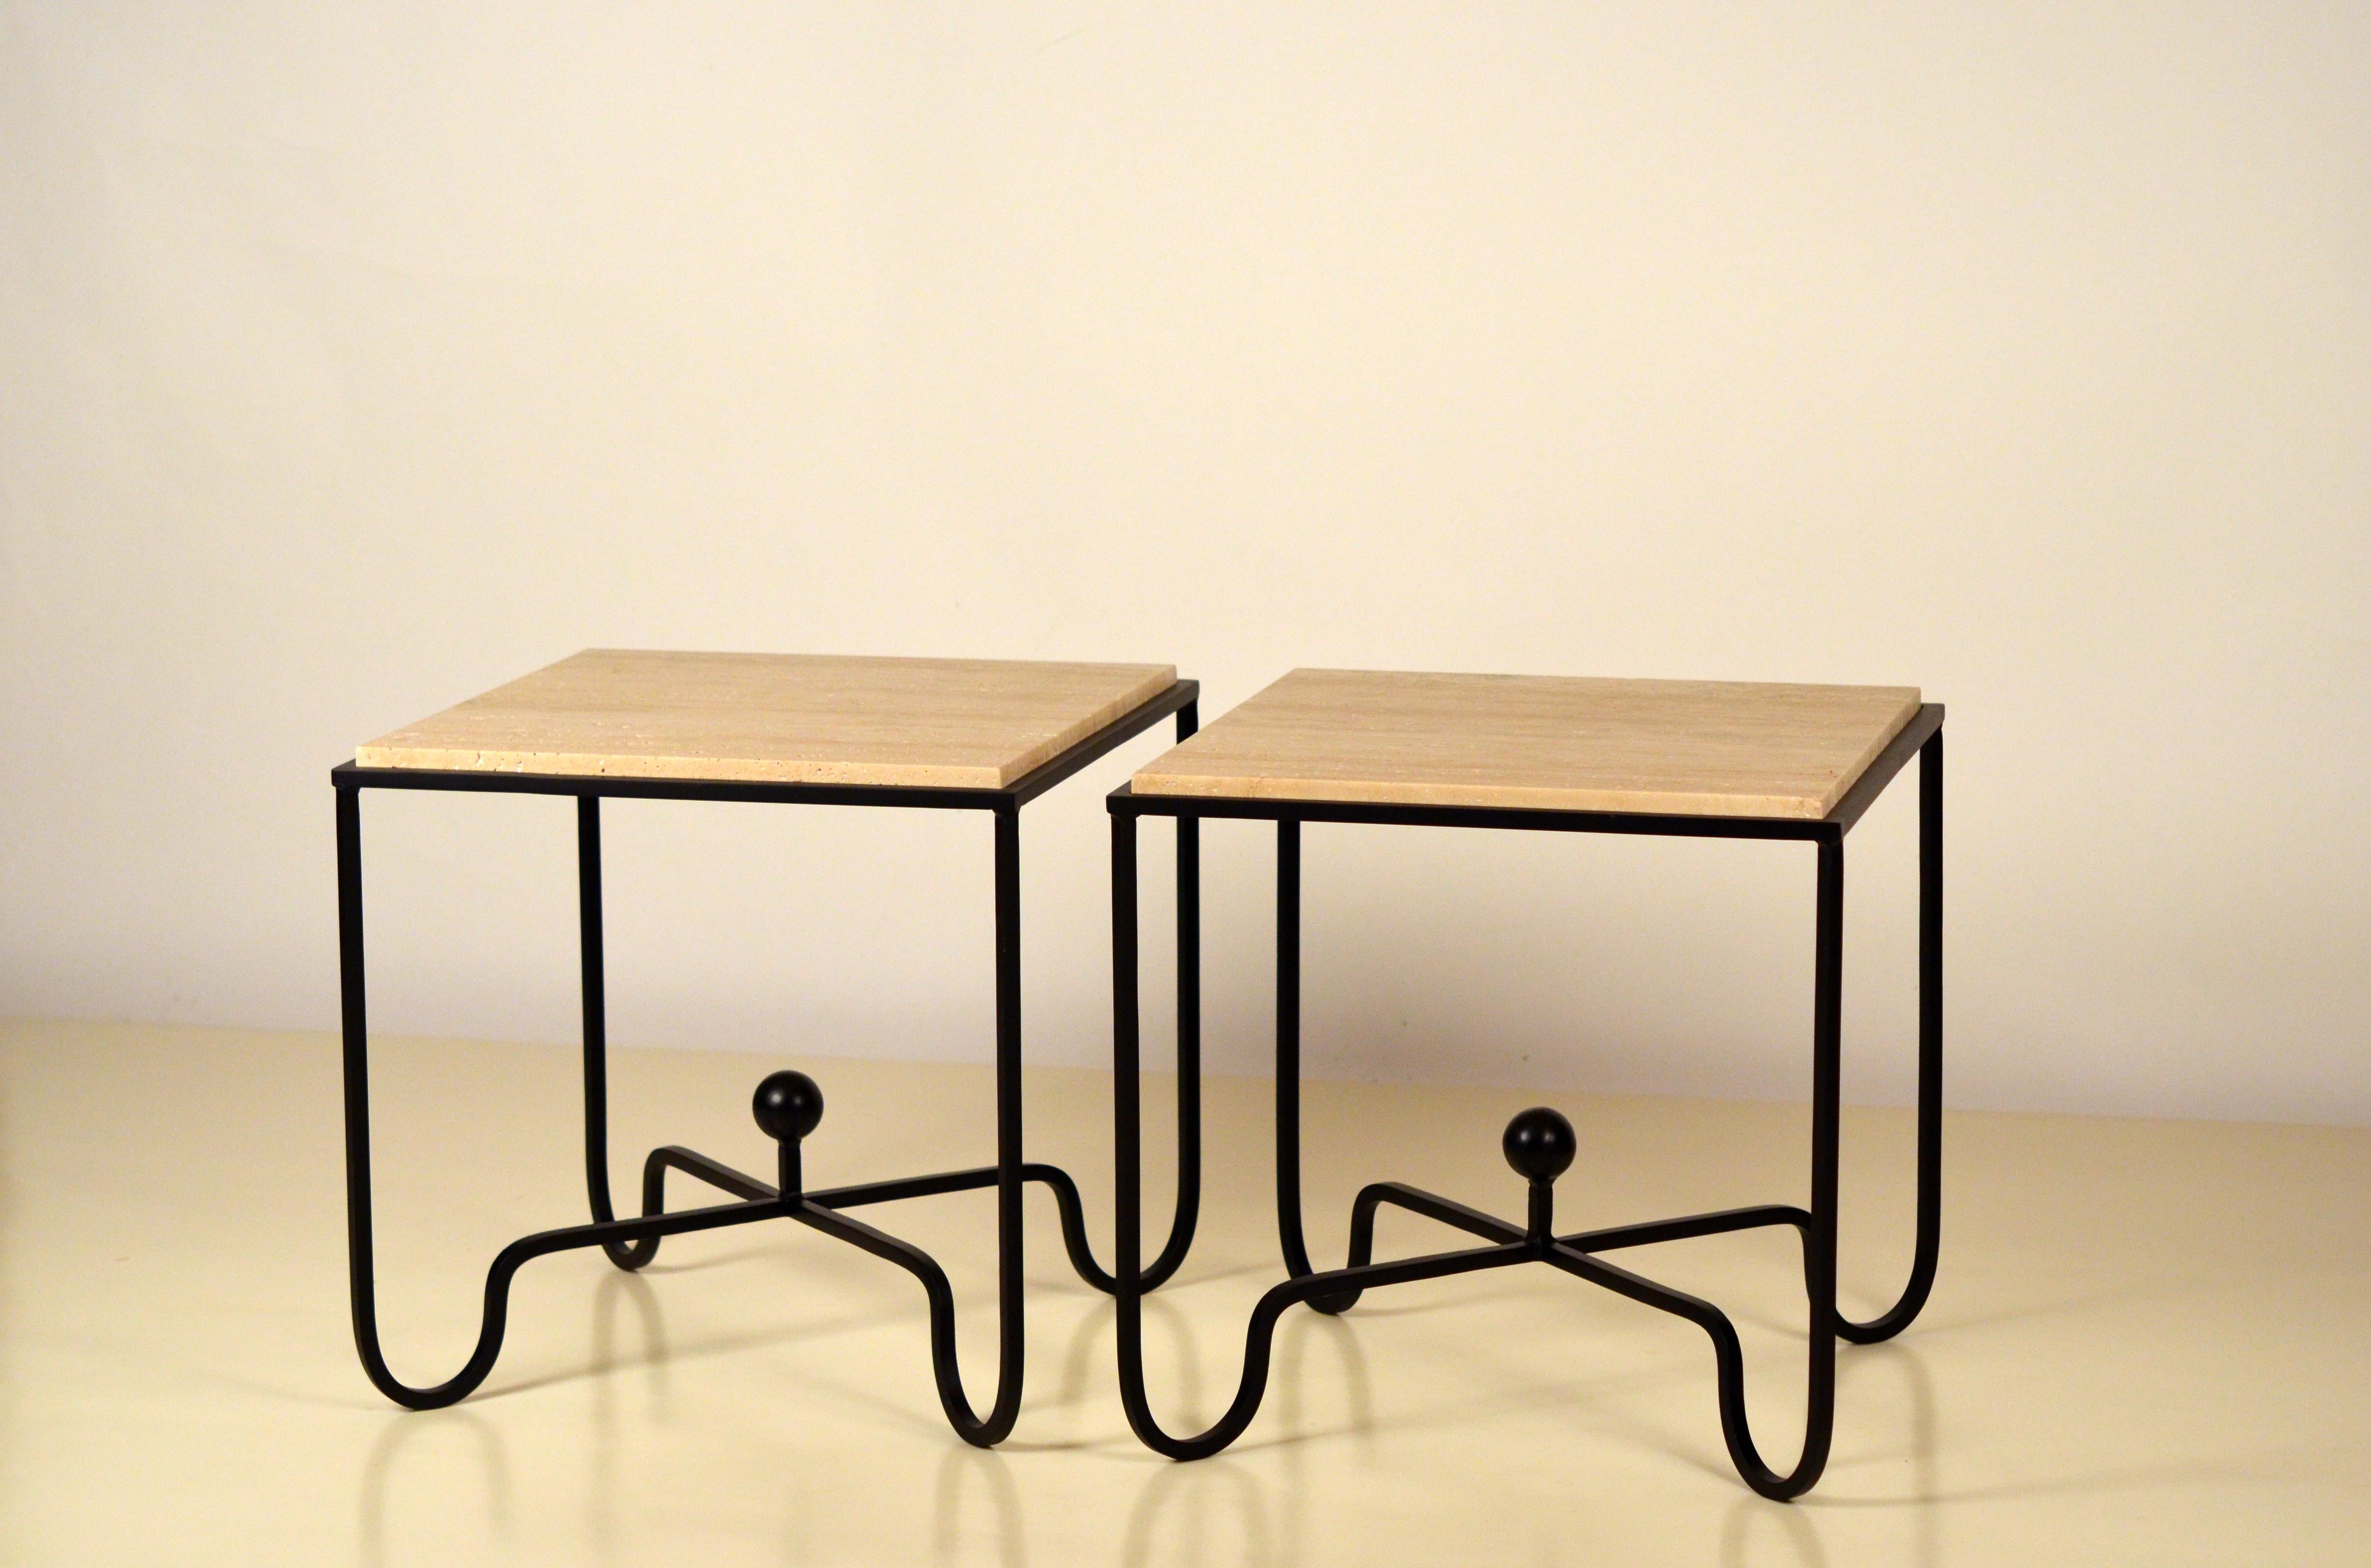 Pair of wrought iron and travertine 'Entretoise' side tables by Design Frères. Chic pair of versatile side or end tables. Also great as a two-part coffee table. Indoor or outdoor use.